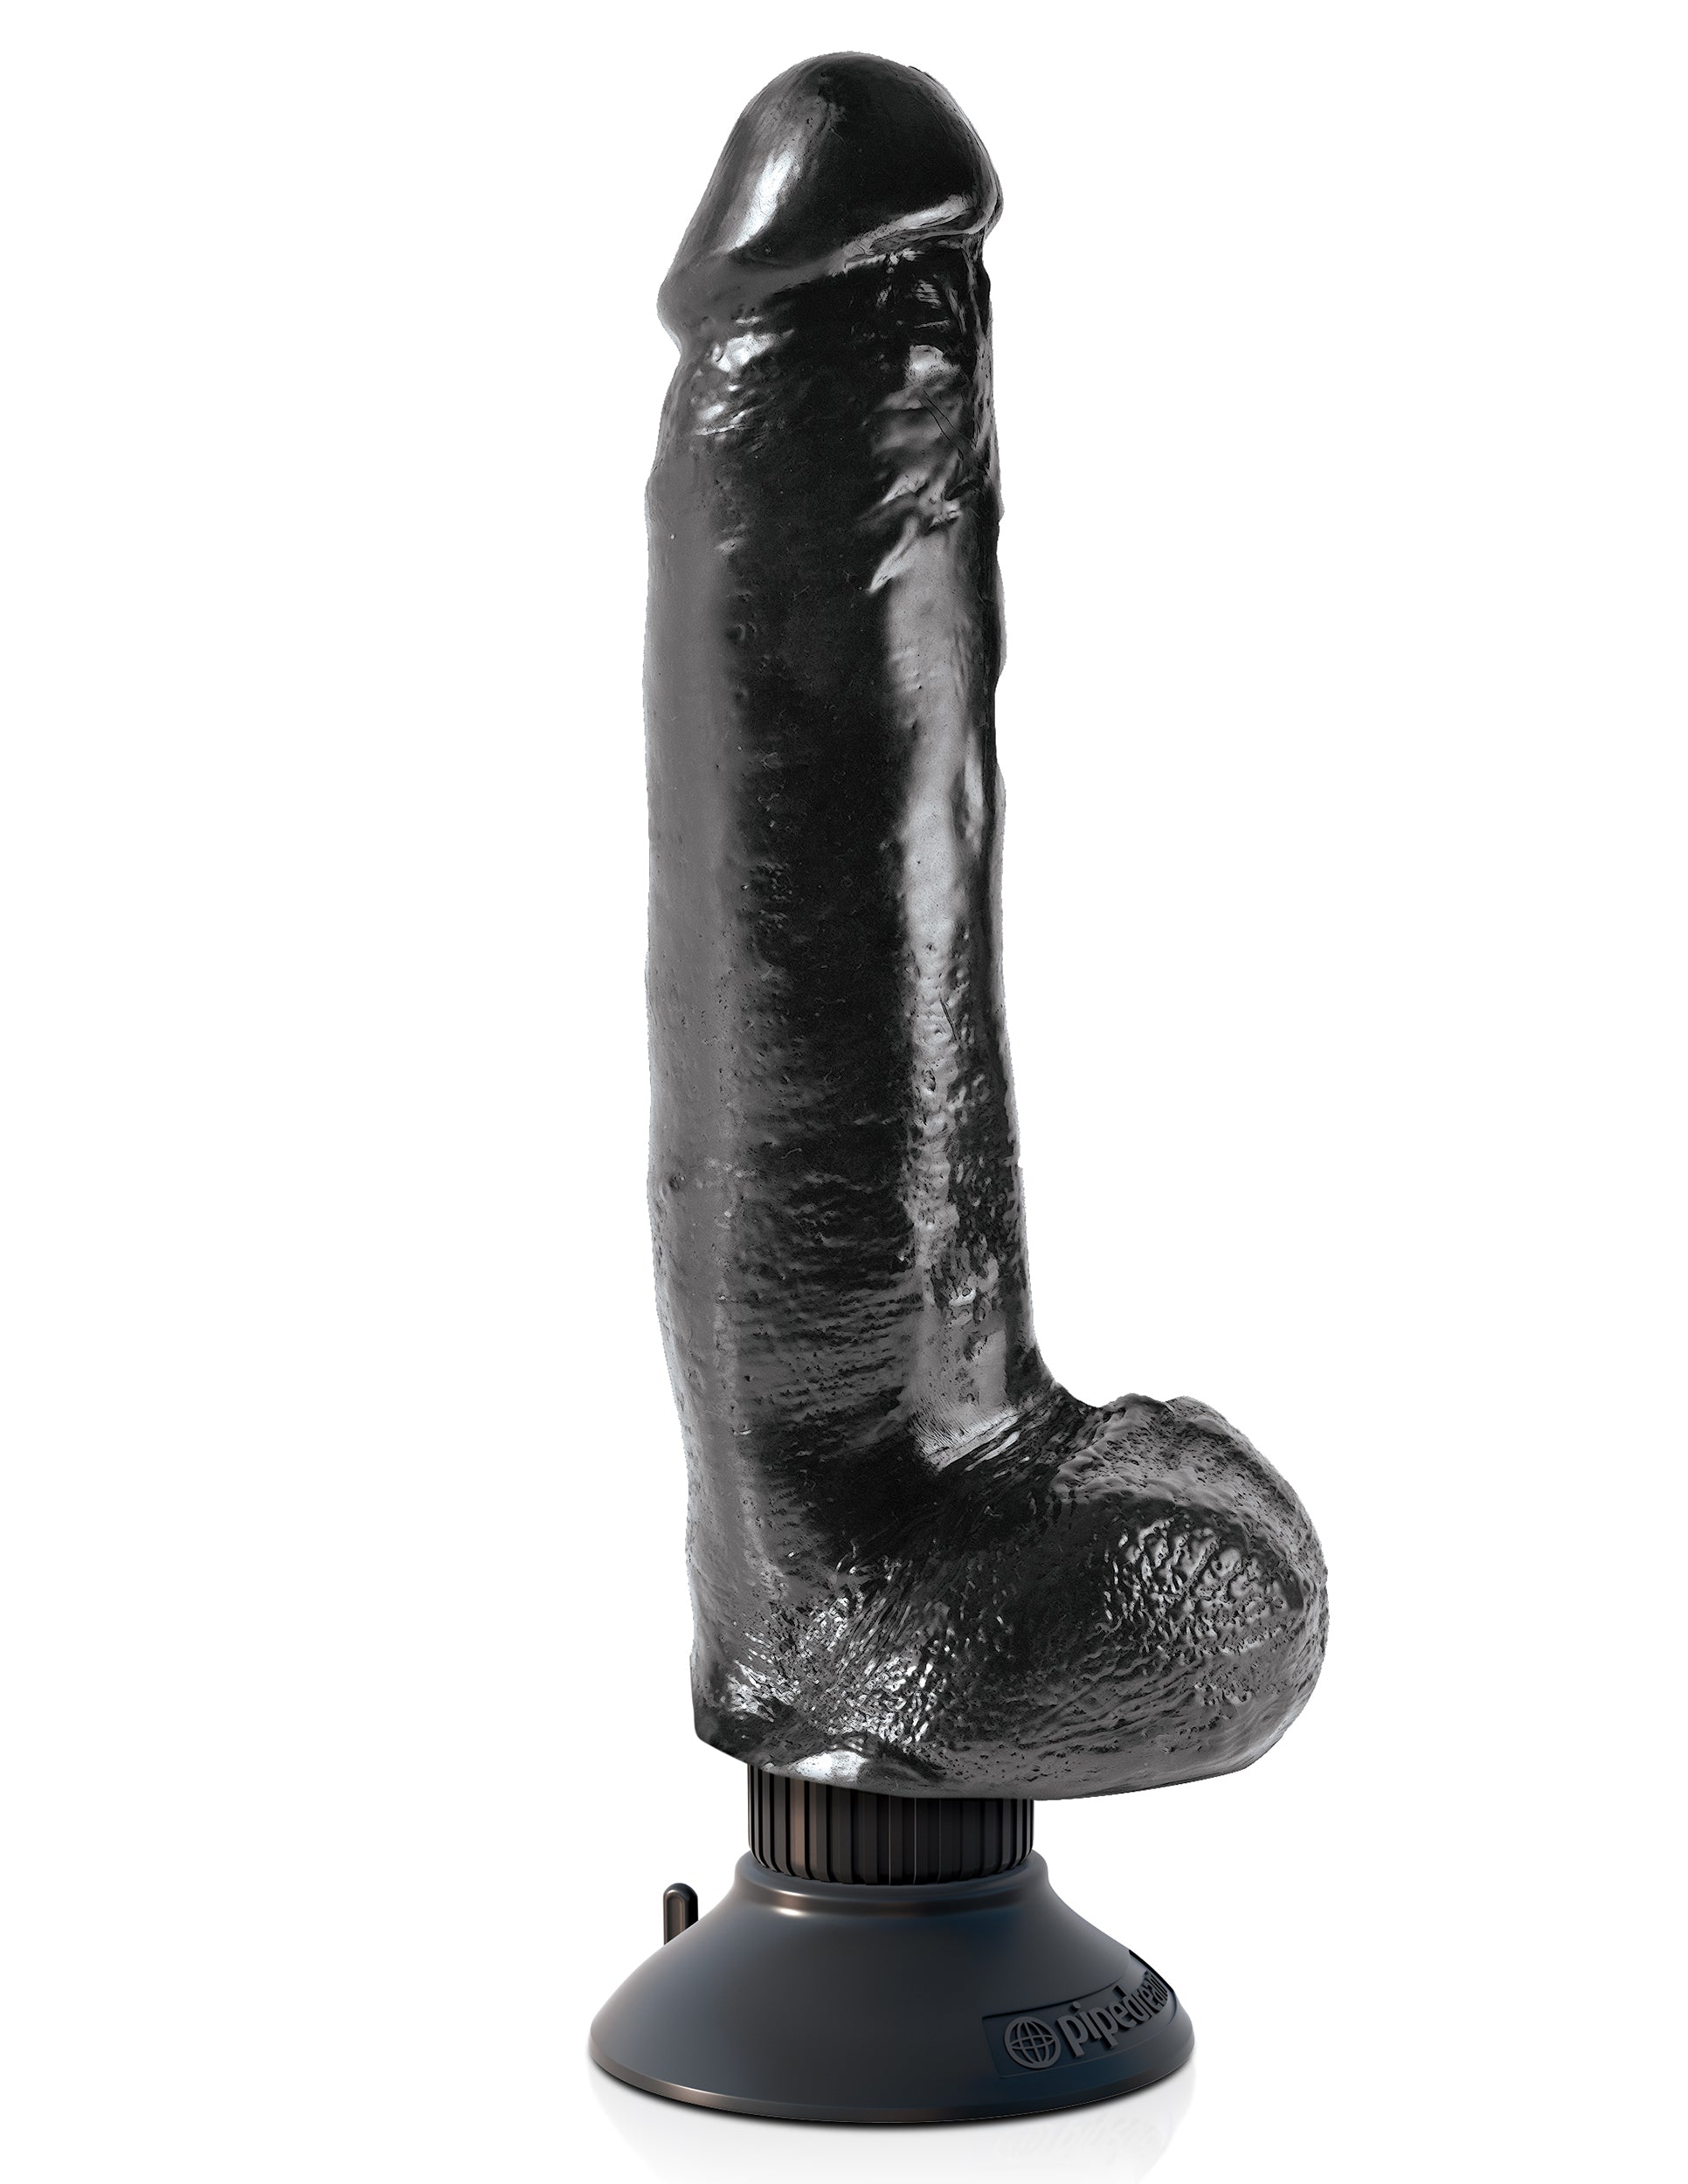 King Cock 9-Inch Vibrating Cock With Balls - Black